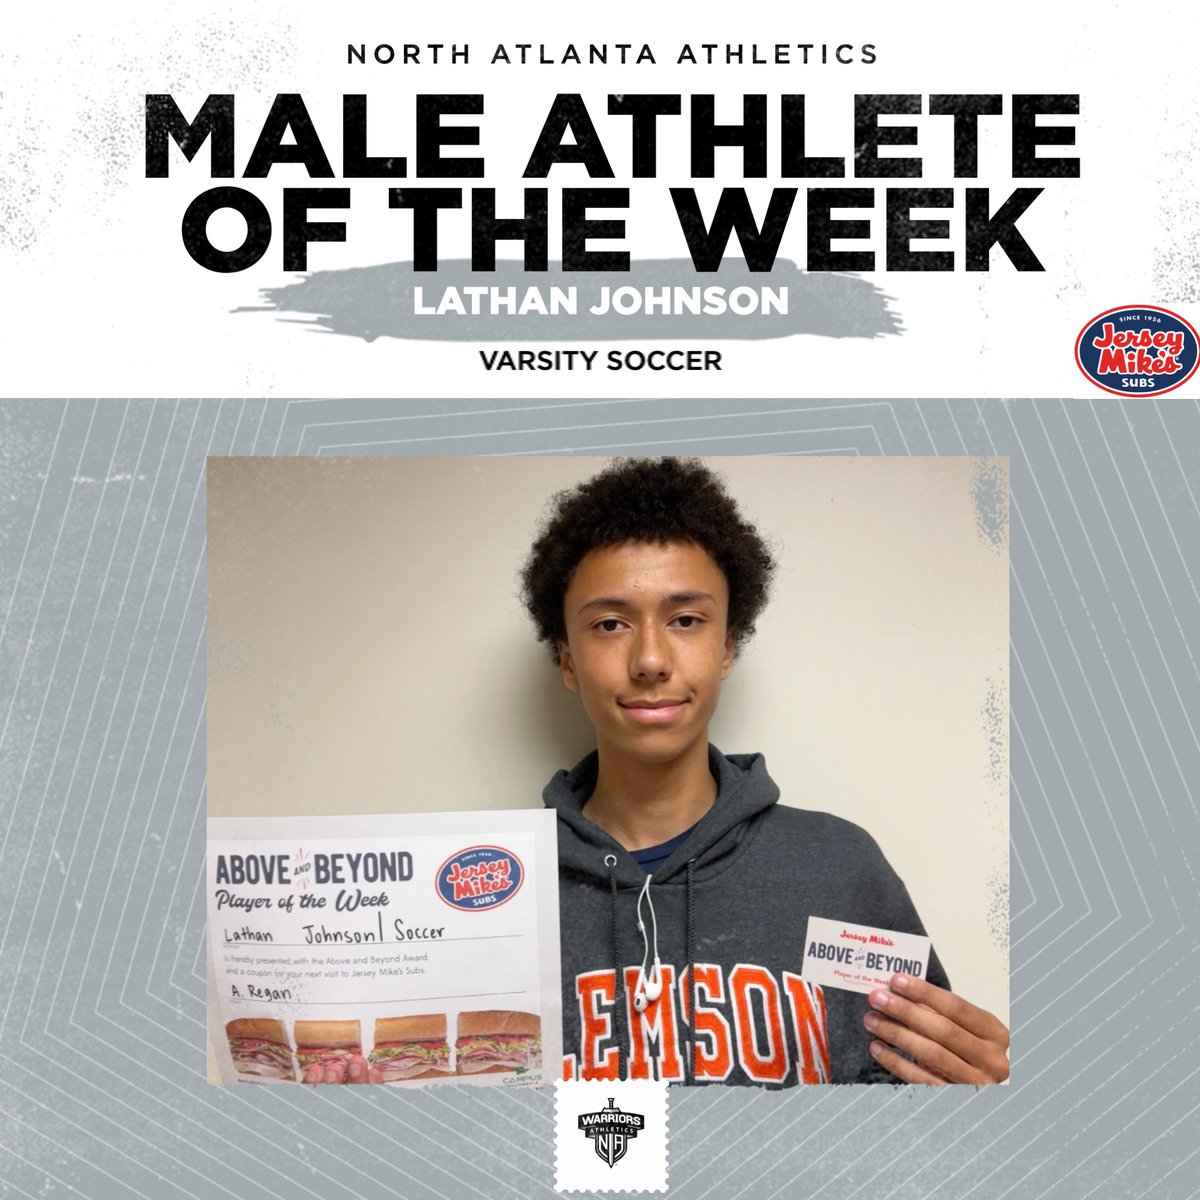 Congrats to Lathan Johnson, Varsity Men's Soccer player for going Above & Beyond. Jersey Mike's Player of the Week. #ASTudentAbove #WarrFam